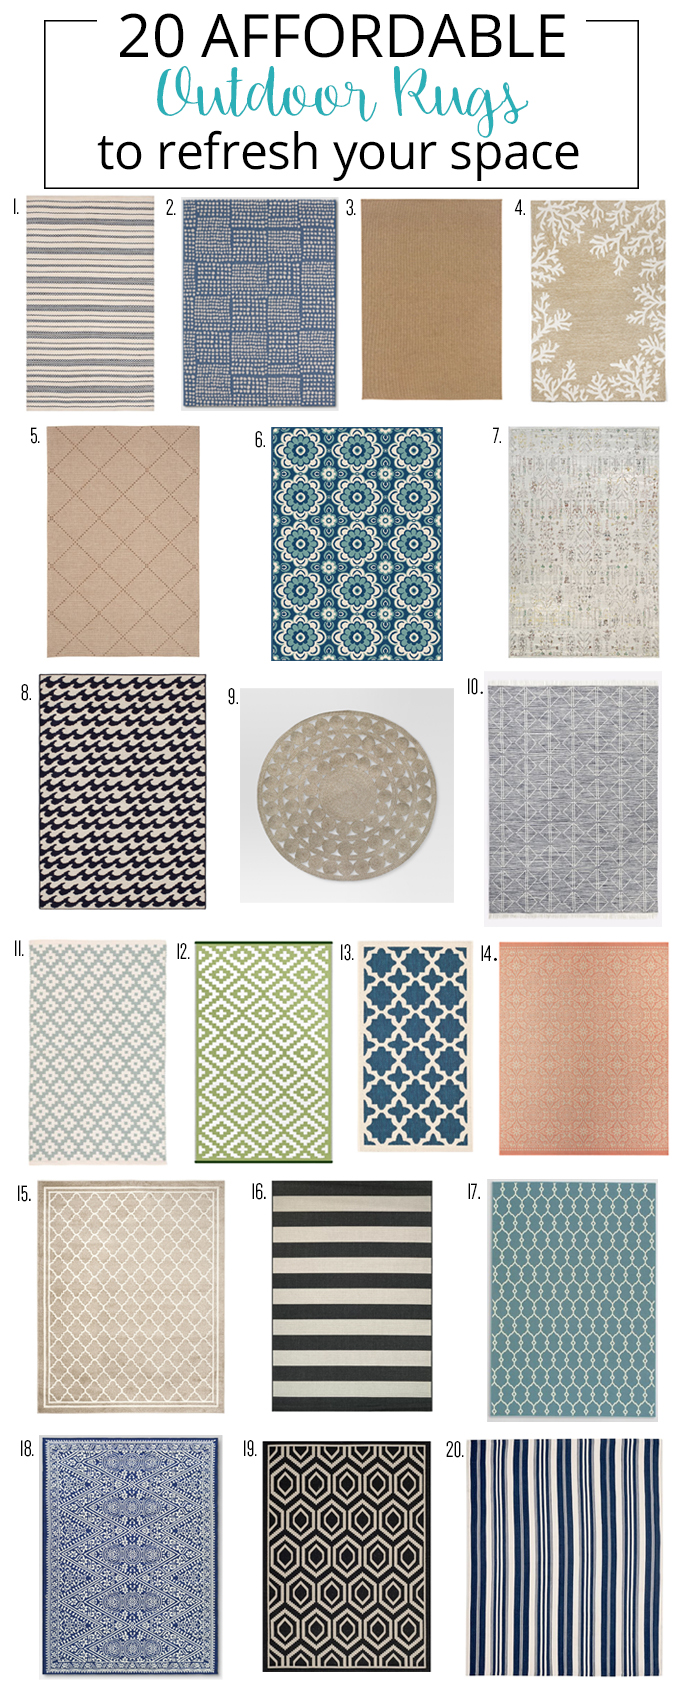 20 Affordable Outdoor Rugs So Pretty, Outdoor Carpet Runners For Porches And Decks